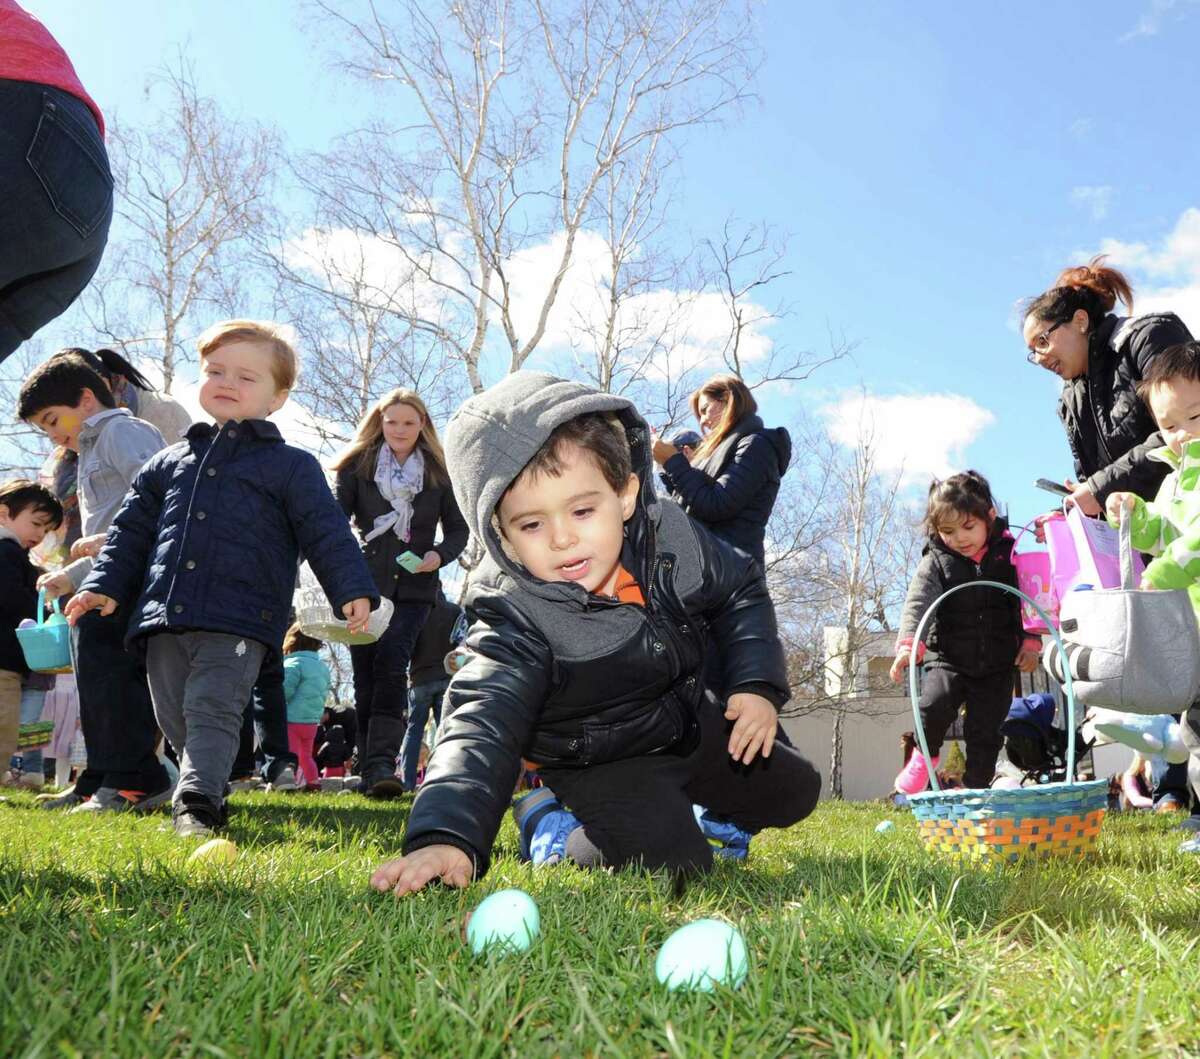 Anthony Gonzalez, 4, of Greenwich, reaches for an egg during the Presbyterian Church of Old Greenwich Easter Egg Hunt at the church in Old Greenwich, Conn., Saturday morning, April 8, 2017.